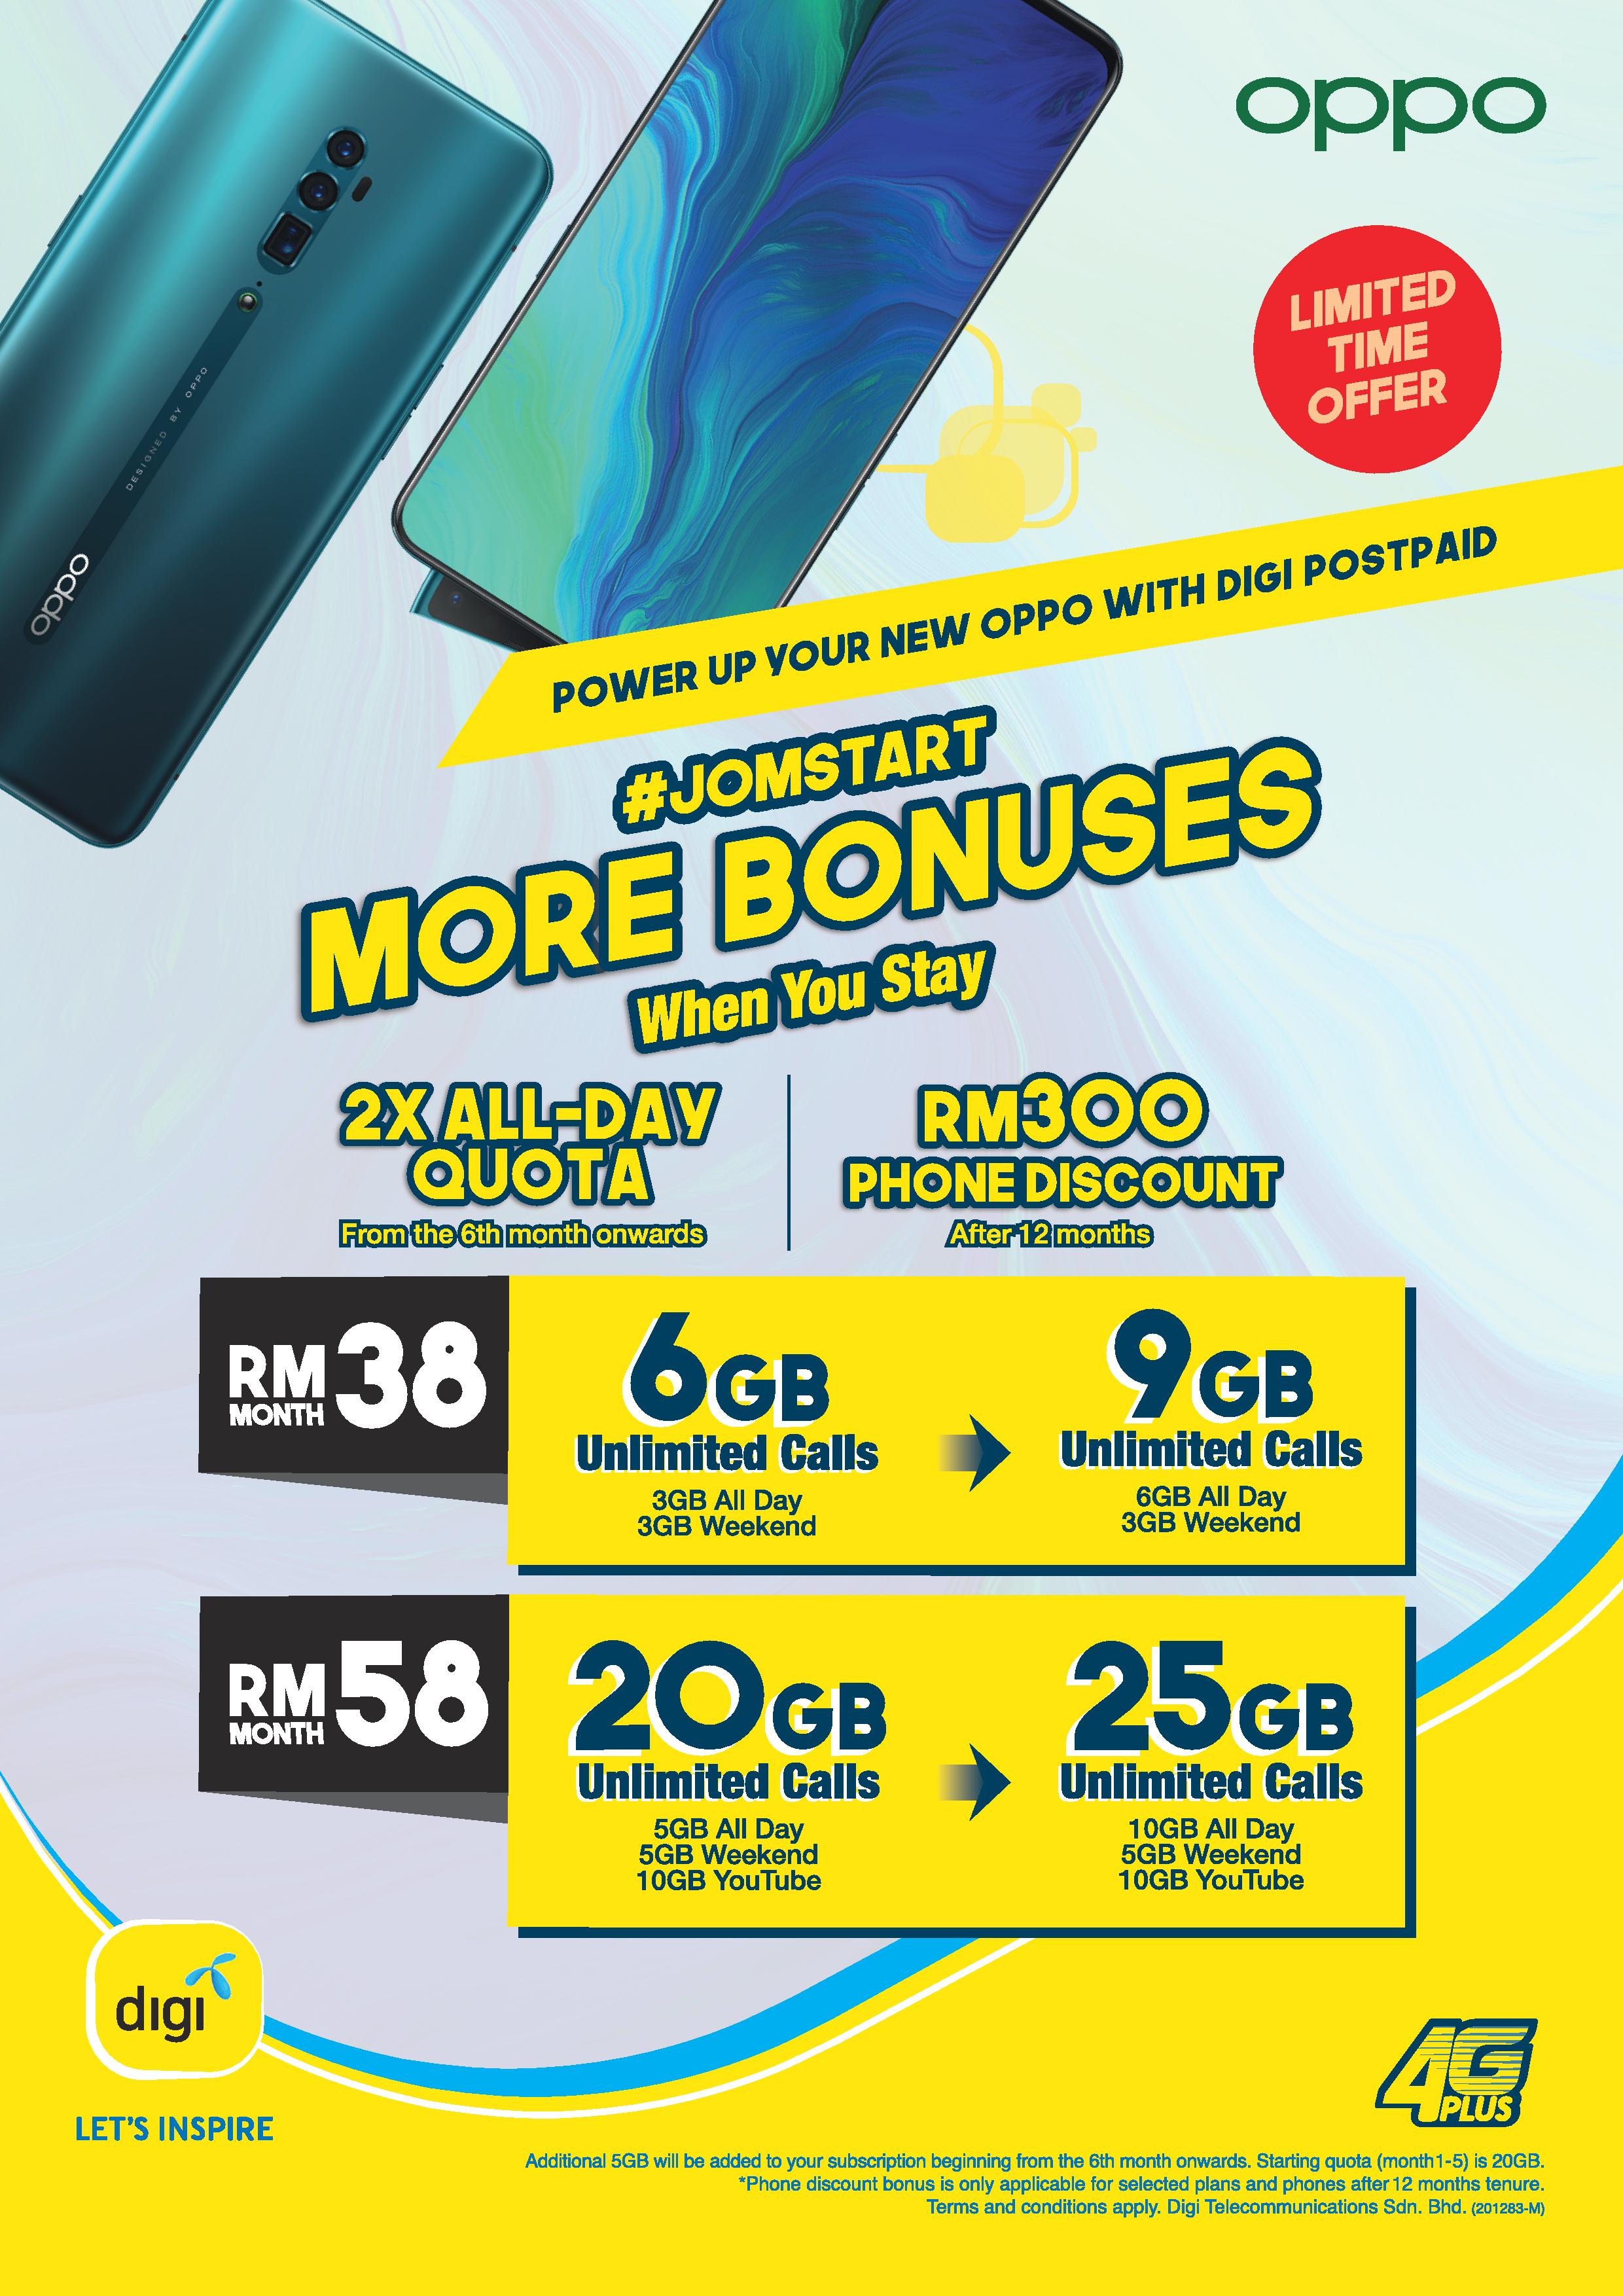 Power Up Your OPPO With Digi Postpaid At OPPO Concept Store for Shocking Deals and Discounts